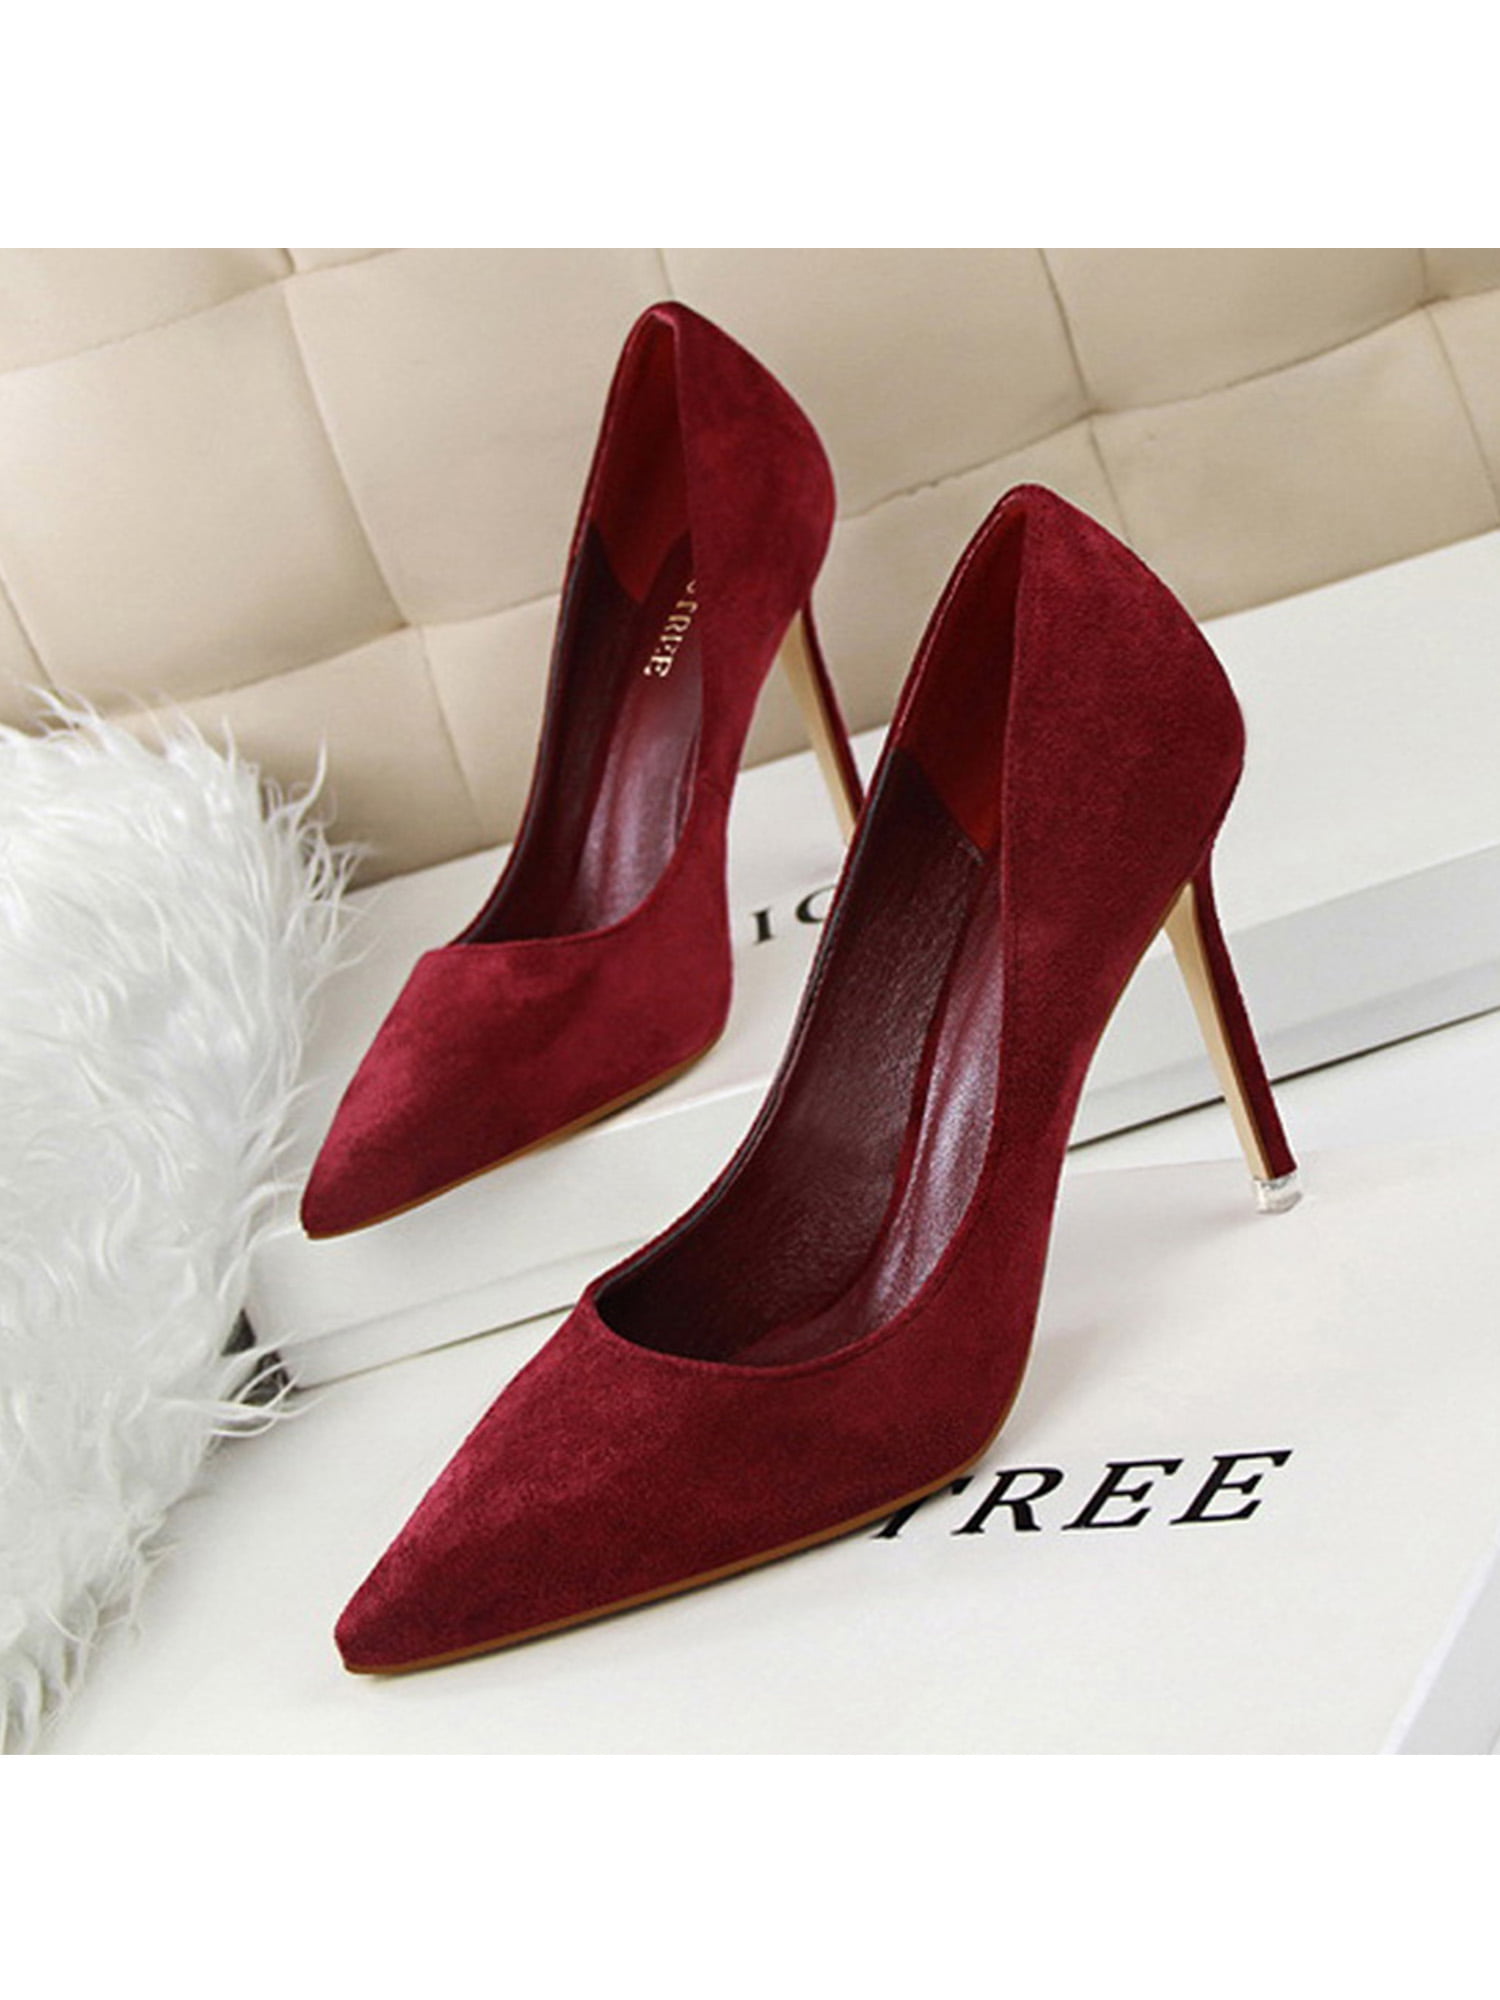 8cm10cm High Heels Red Wedding Shoes Suede Pointed Toe Dress Classic Pumps  Luxury Women Shoes Stiletto Heels Slip-on Party Shoes - Pumps - AliExpress